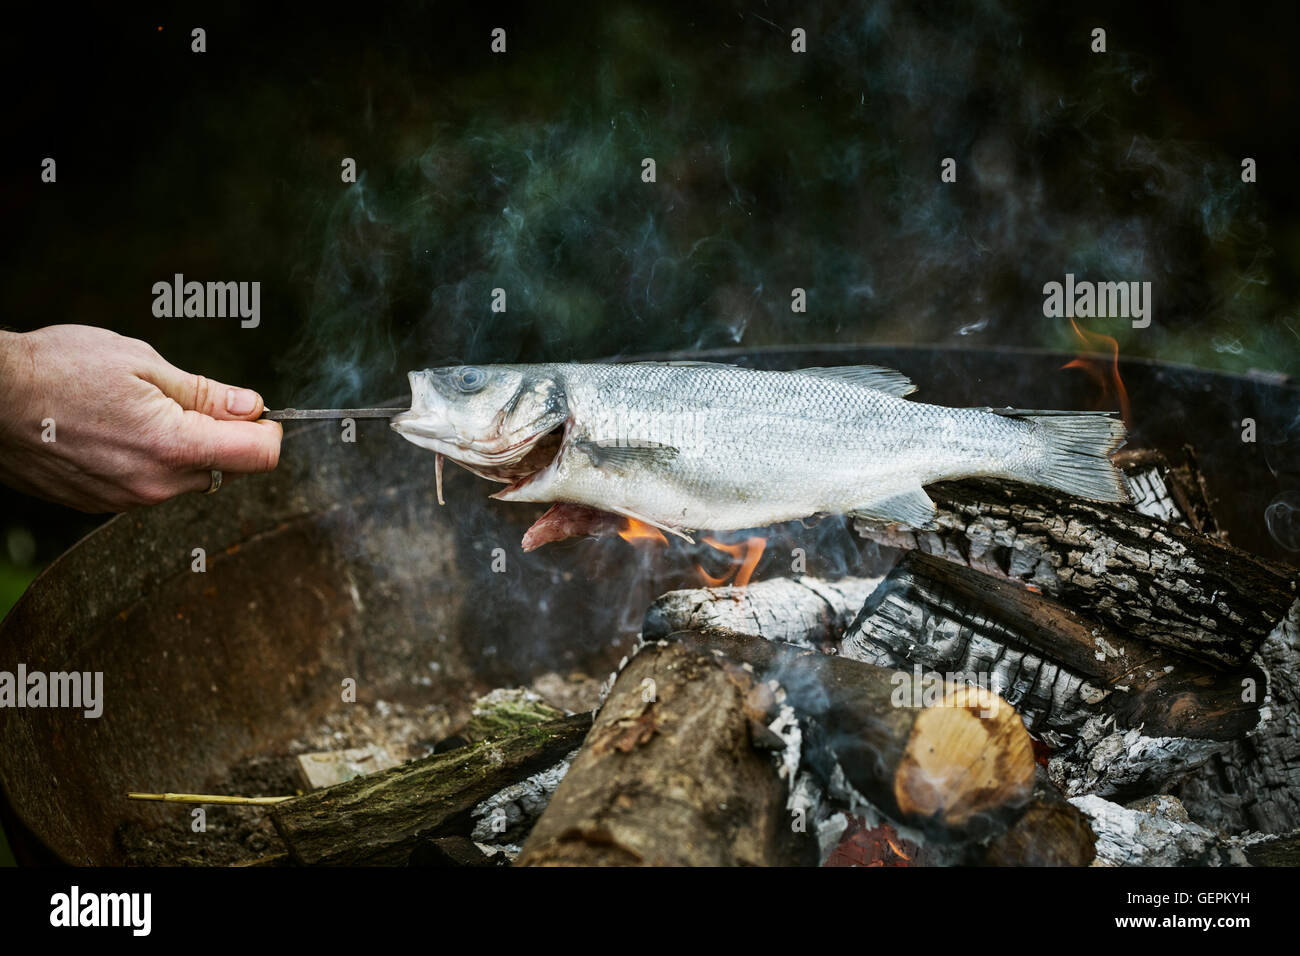 Chef grilling a whole fish on a barbecue. Stock Photo